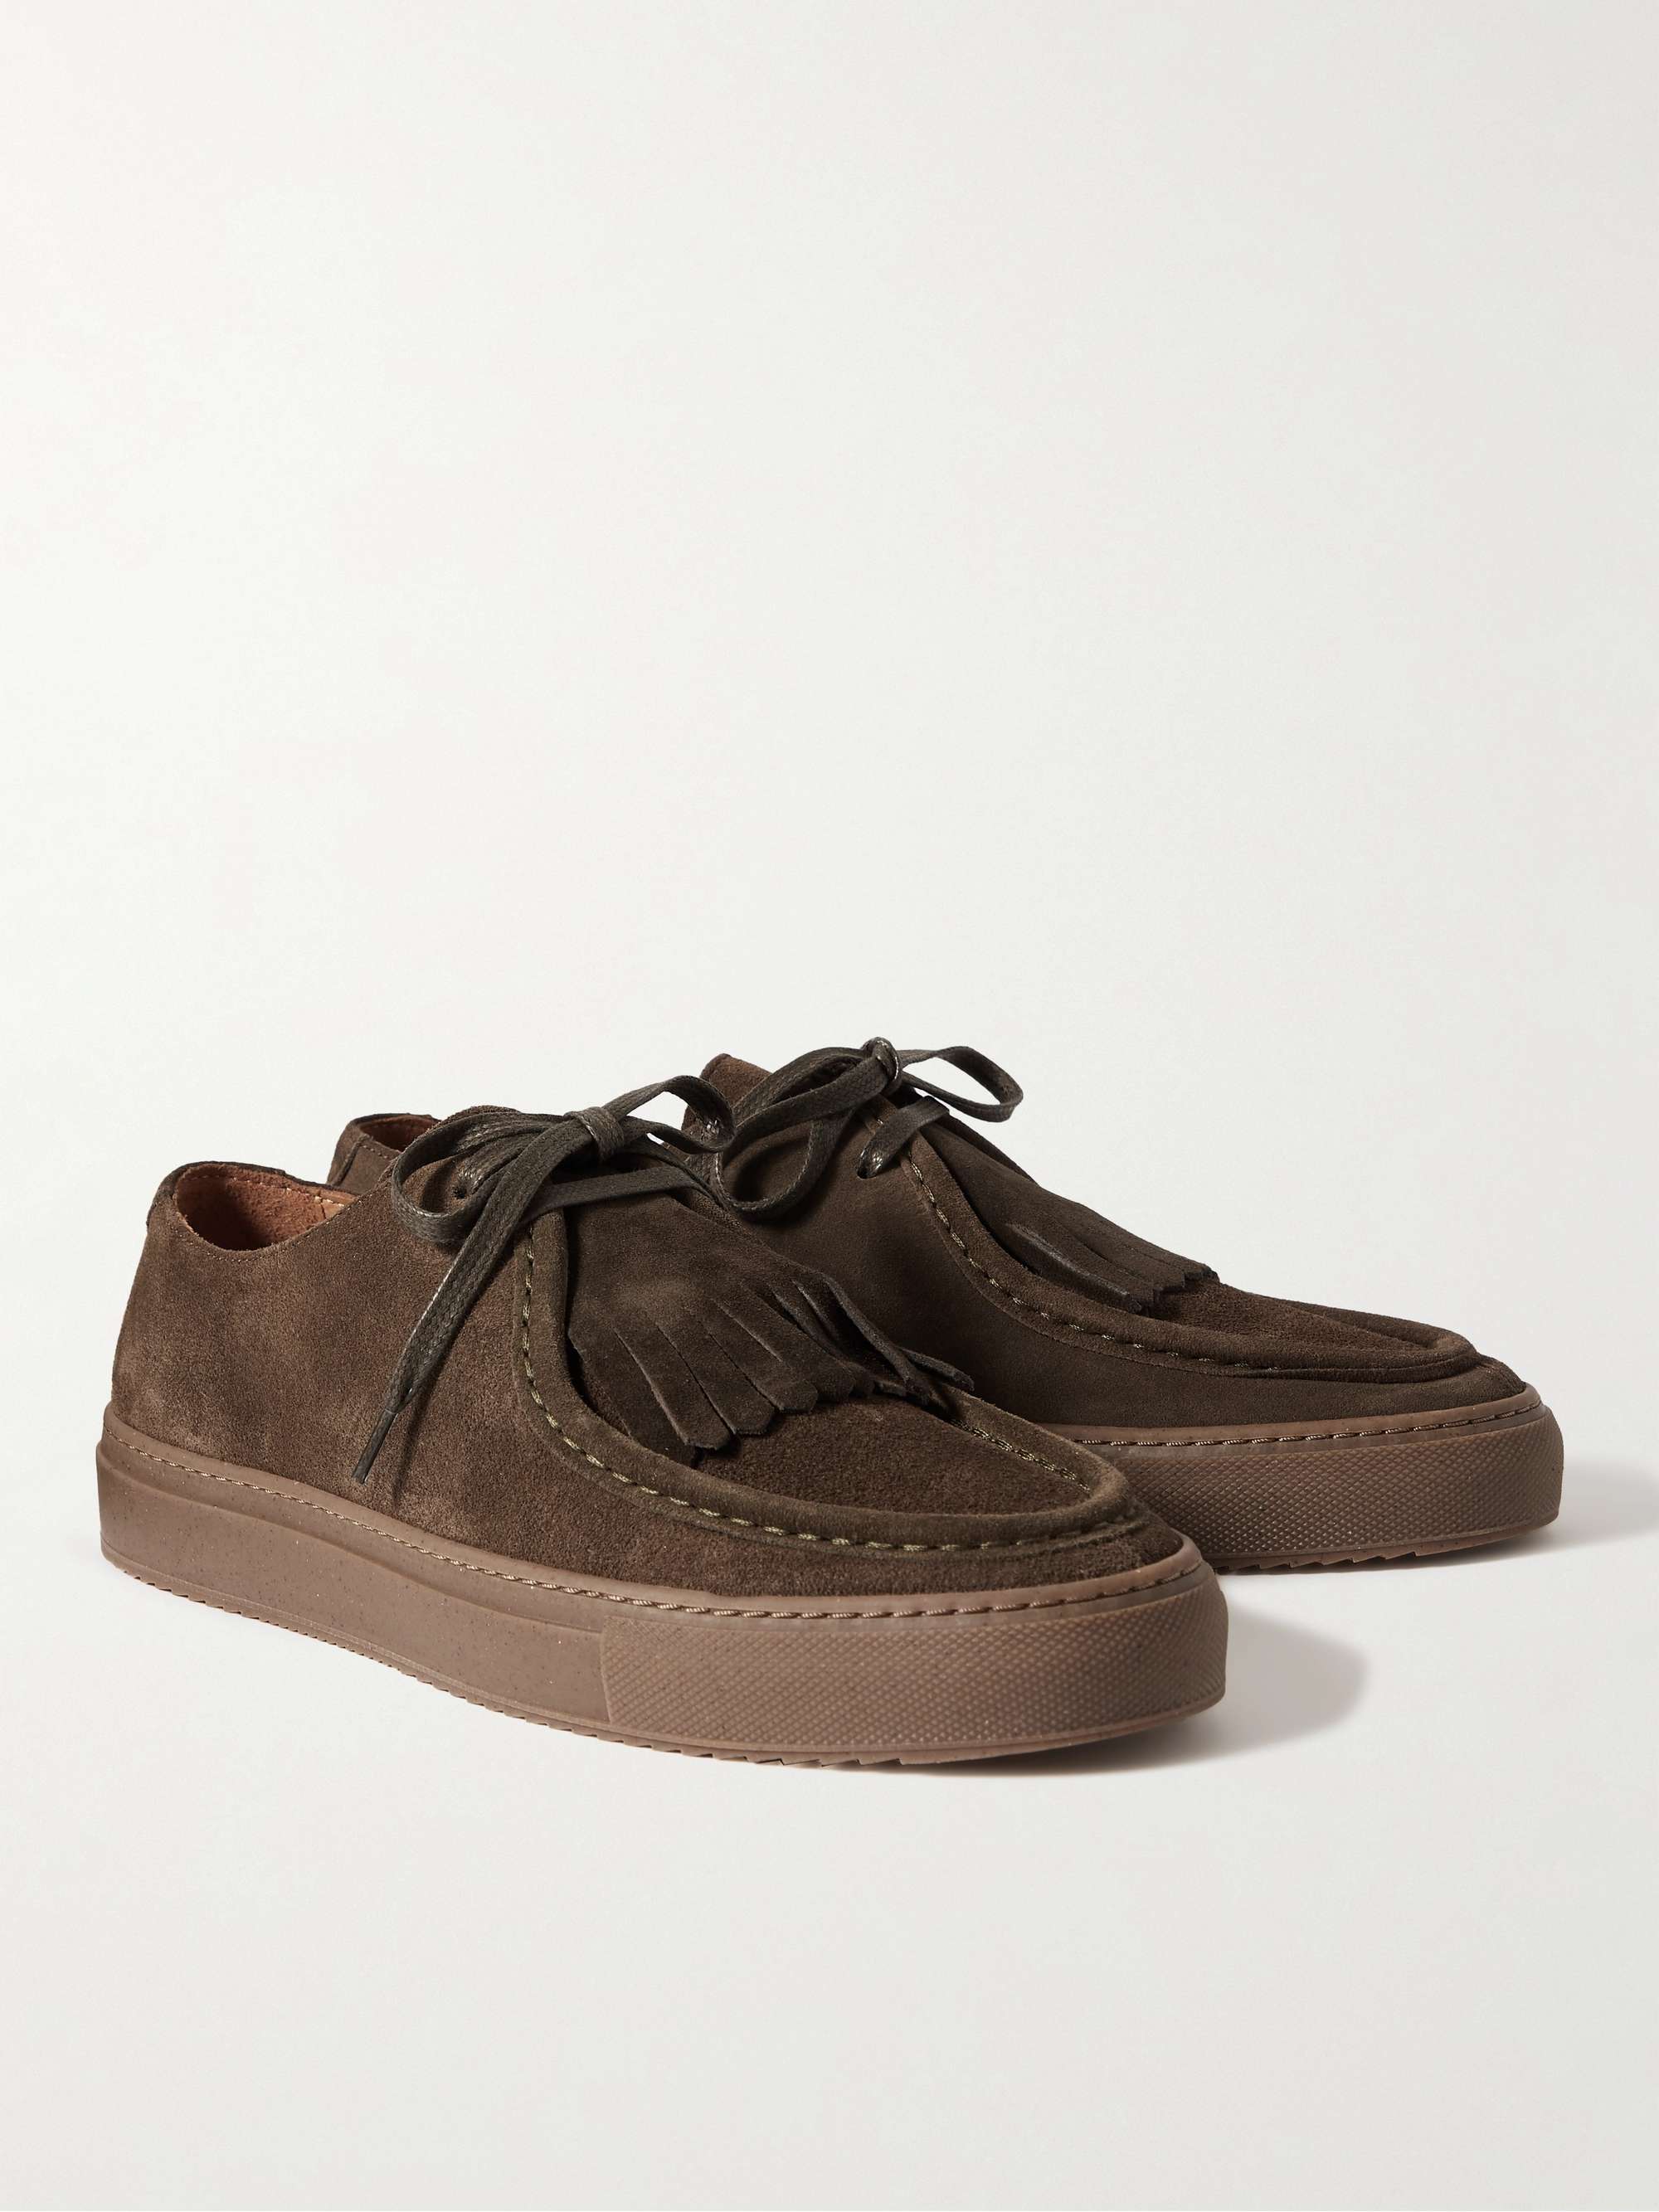 MR P. Detachable Fringed Regenerated Suede by evolo® Derby Shoes